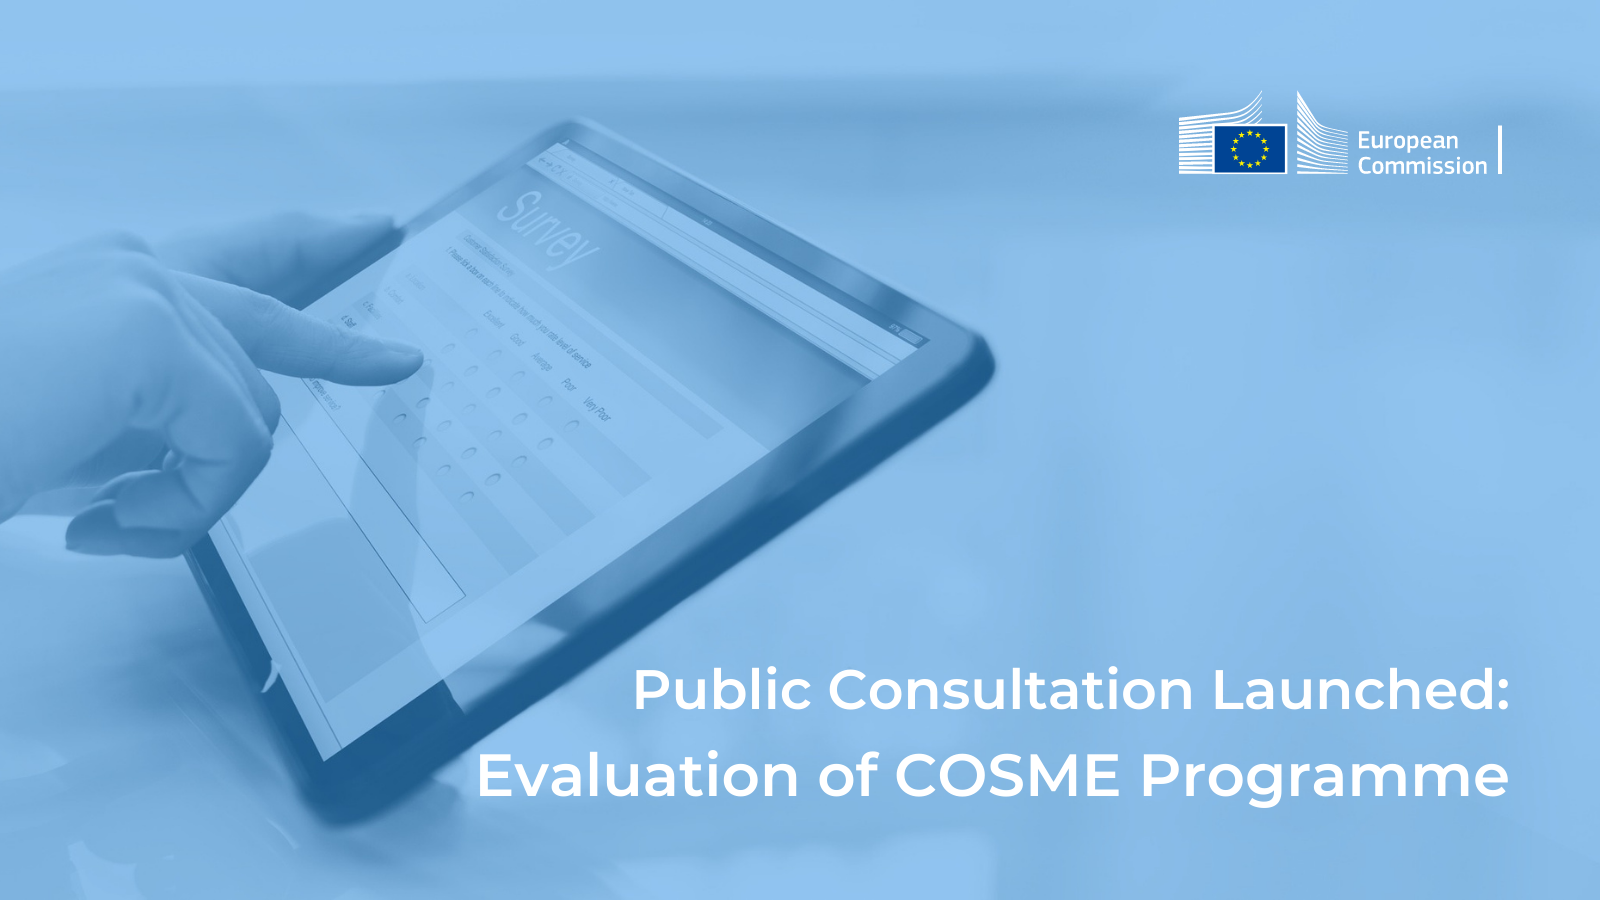 Public Consultation Launched for Evaluation of COSME Programme